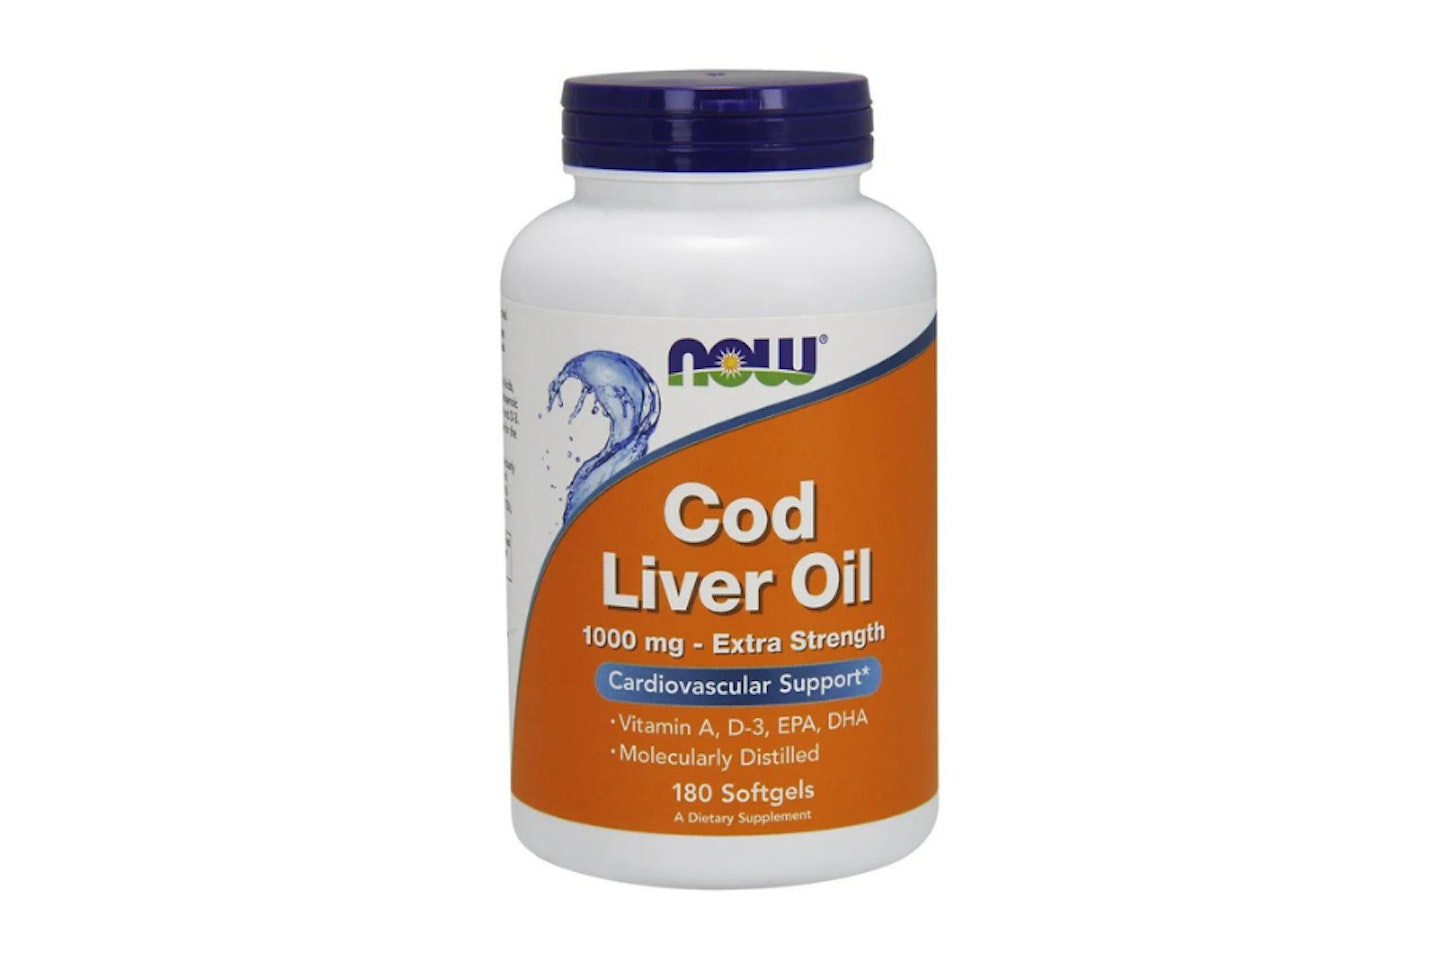 
NOW Foods Cod Liver Oil, 1000mg Extra Strength - 180 softgels